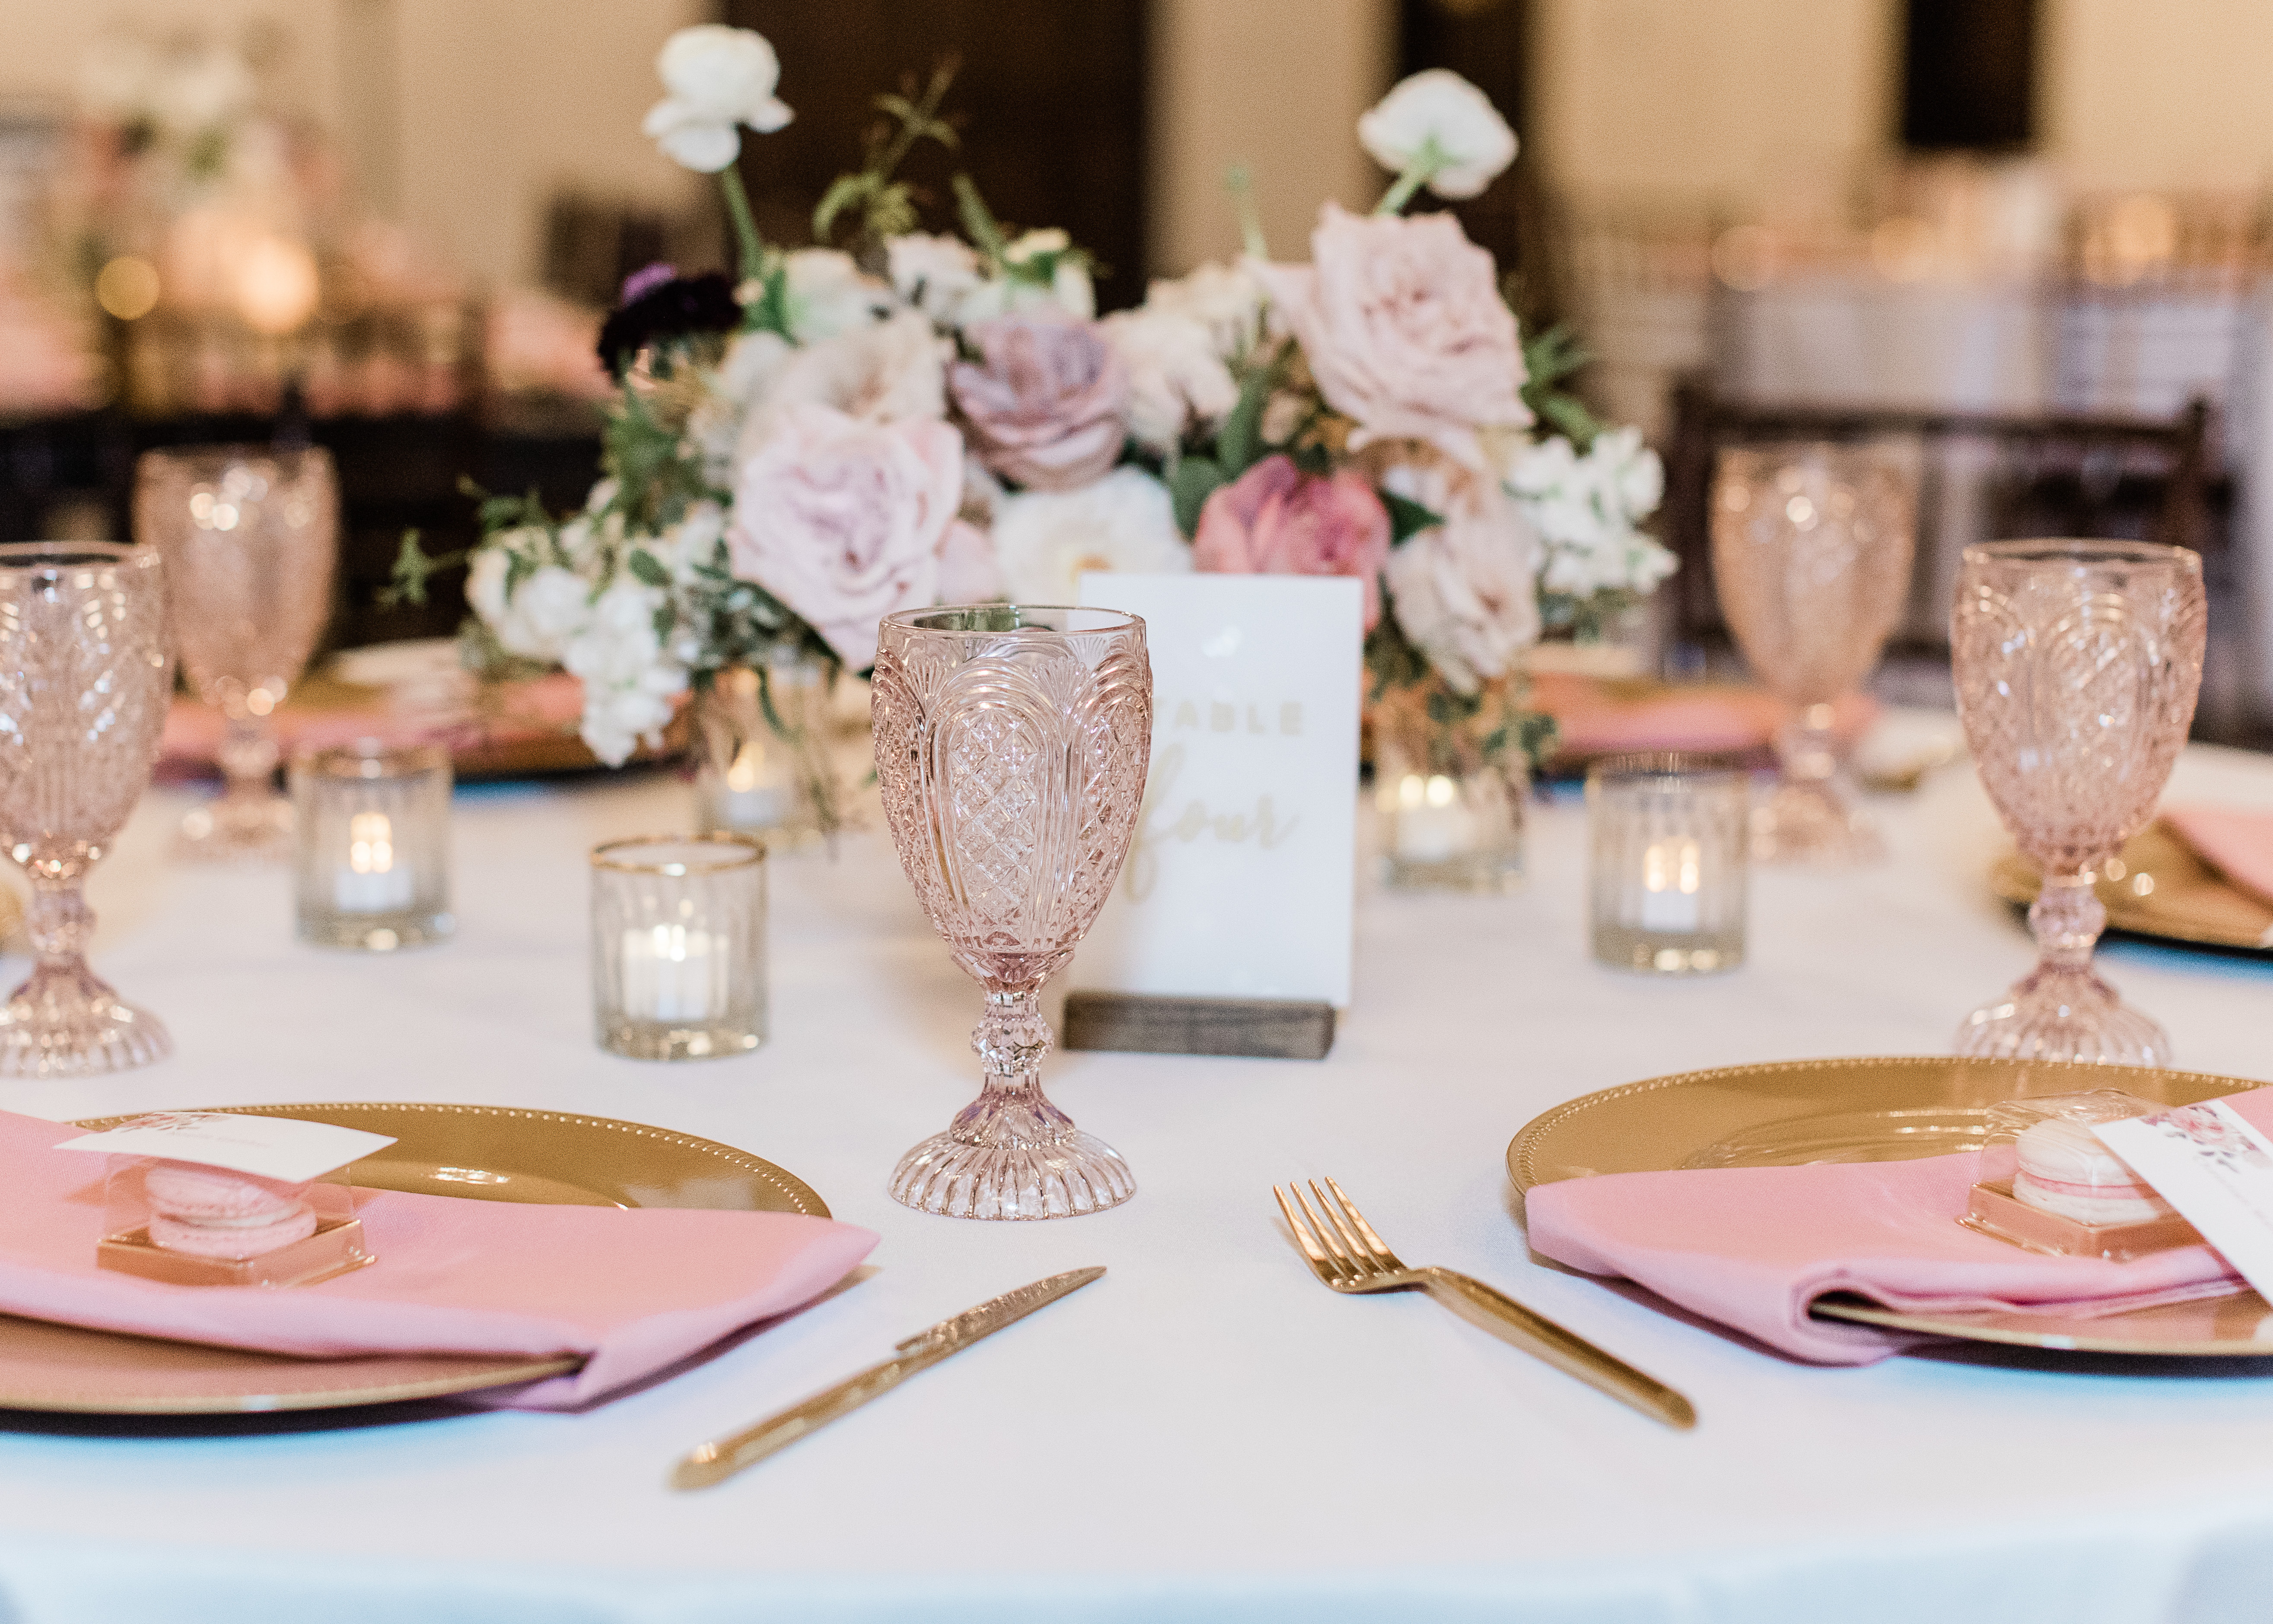 Table setting with gold chargers, pink napkins, pink glassware and fresh florals at a Texas hill country wedding reception at wedding venue,Ma Maison.